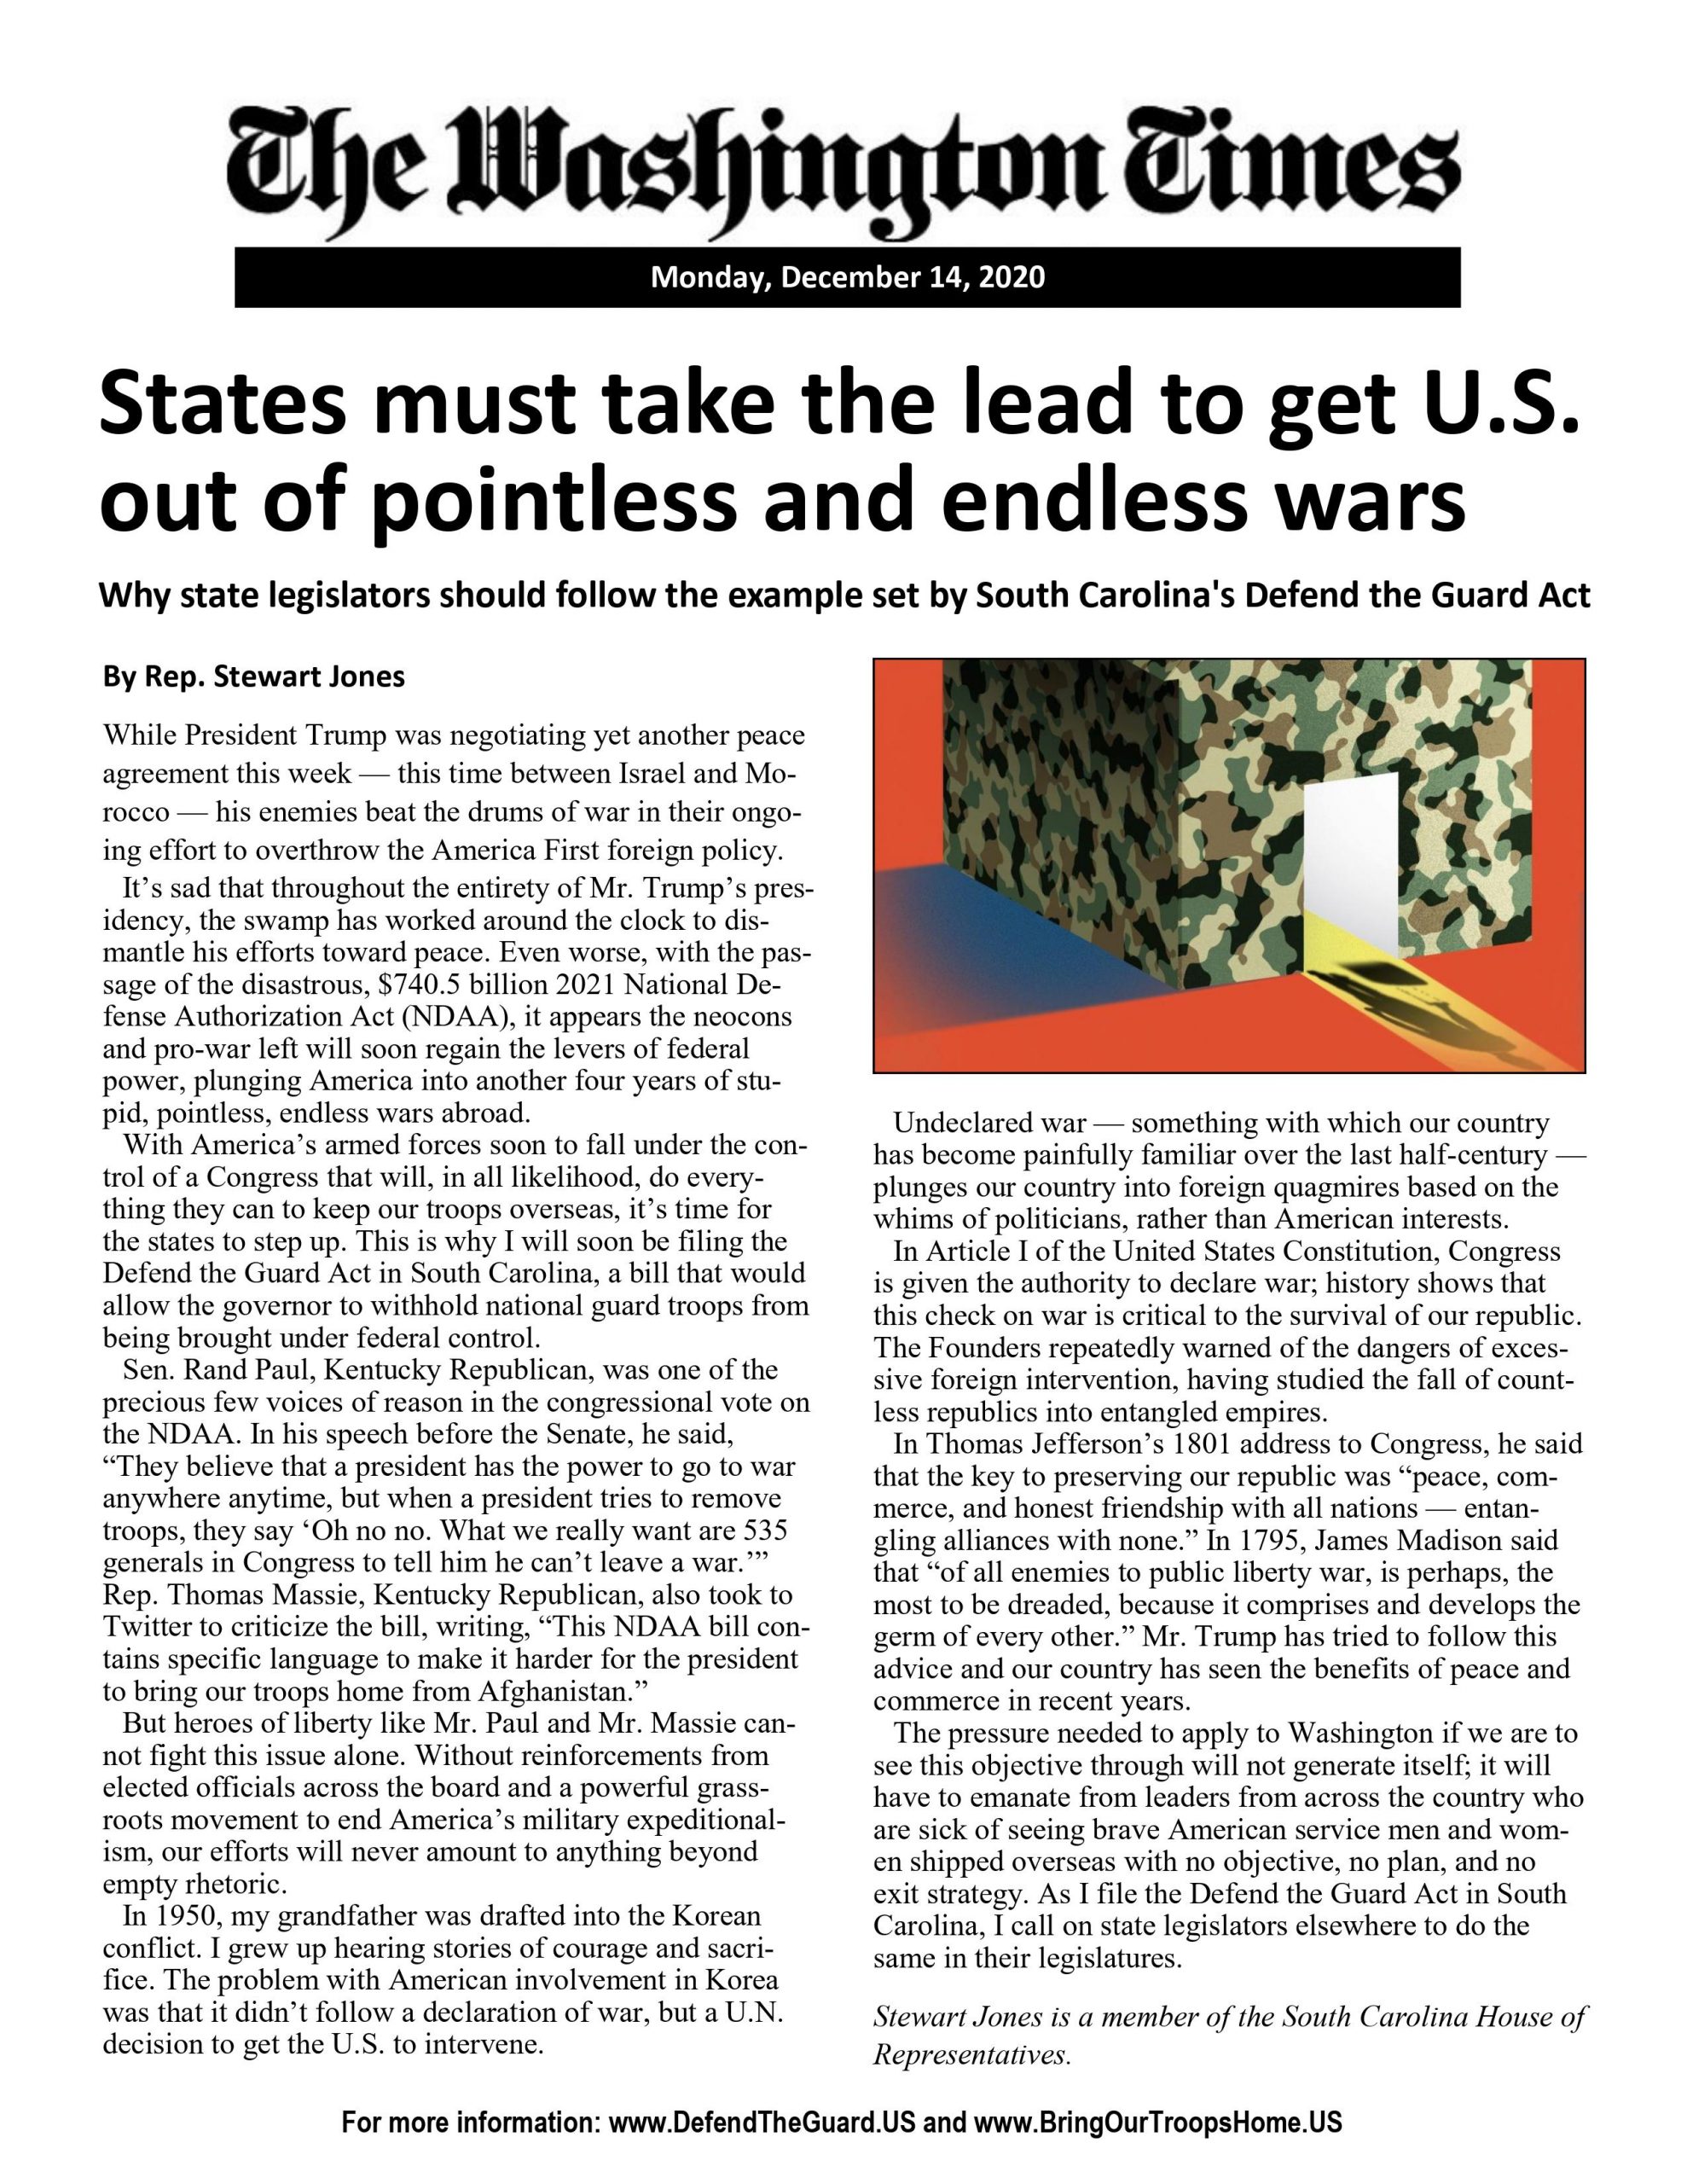 States Must Take the Lead to Get U.S. Out of Pointless and Endless War